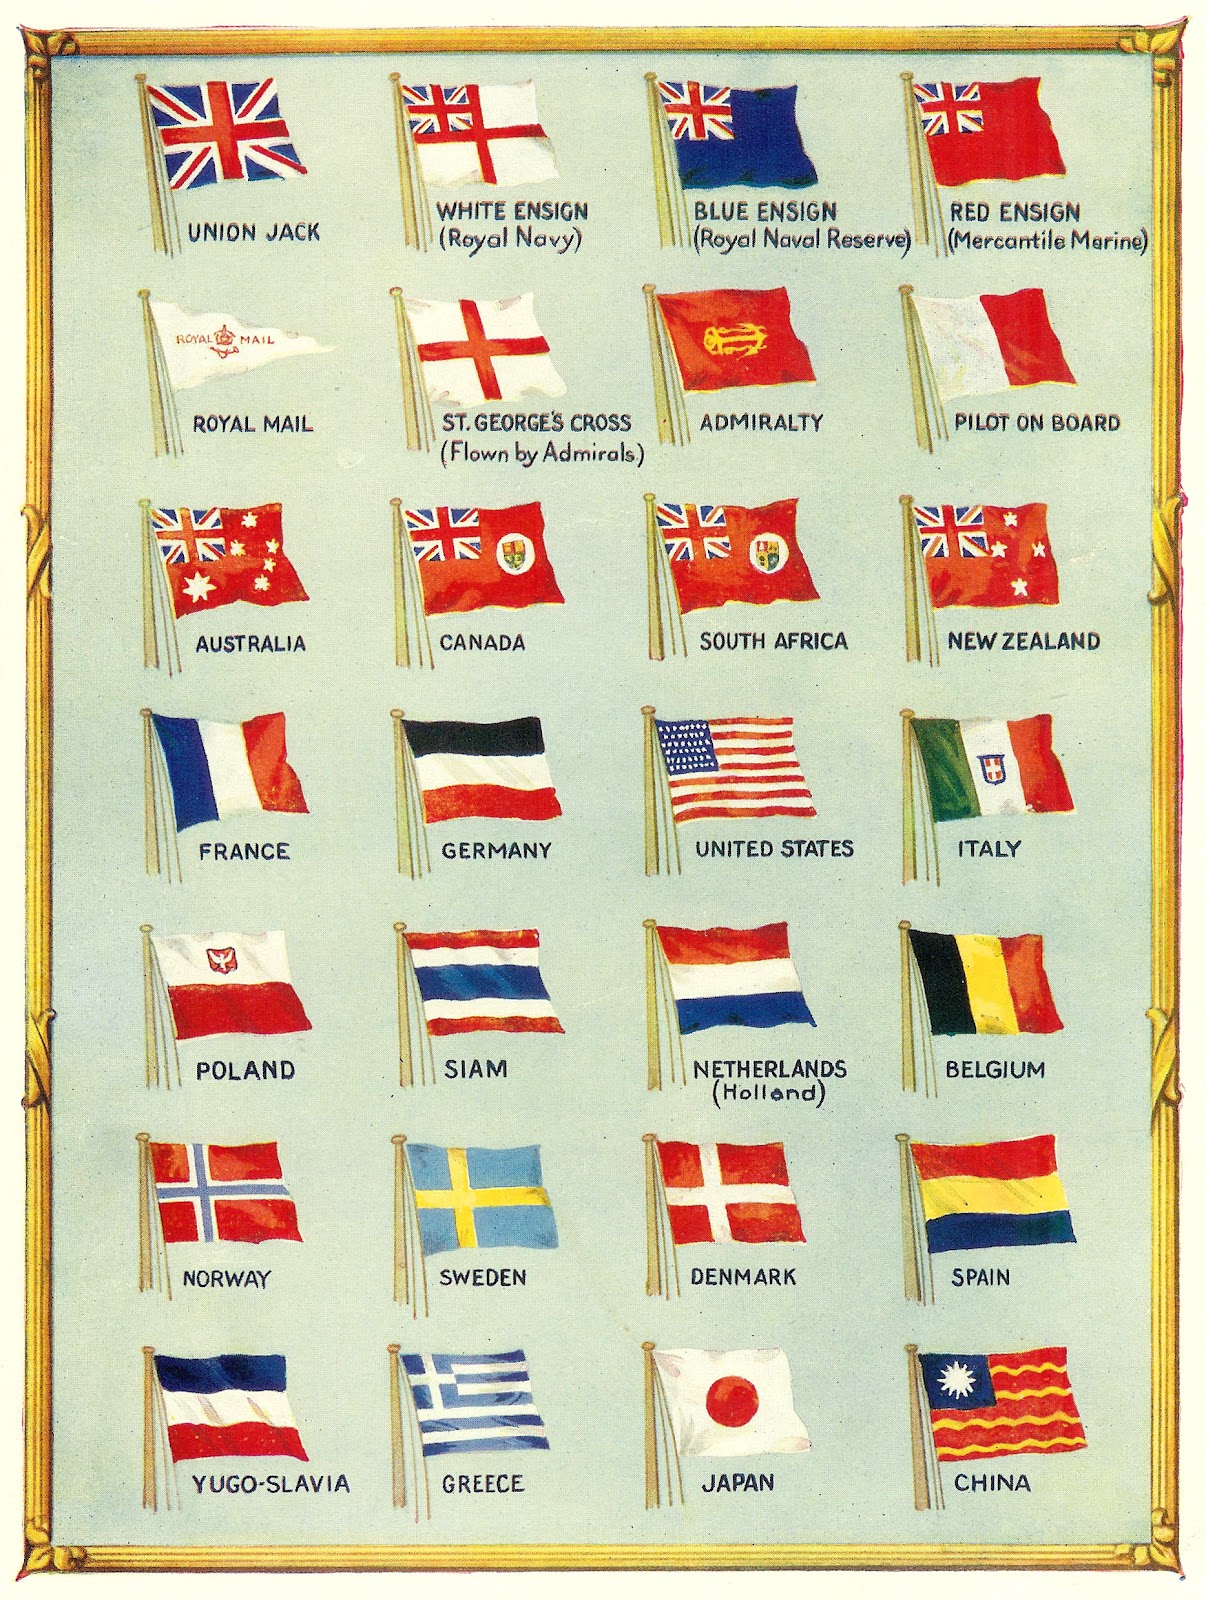 Antique Images: Vintage Graphic of Flags: Flags of 